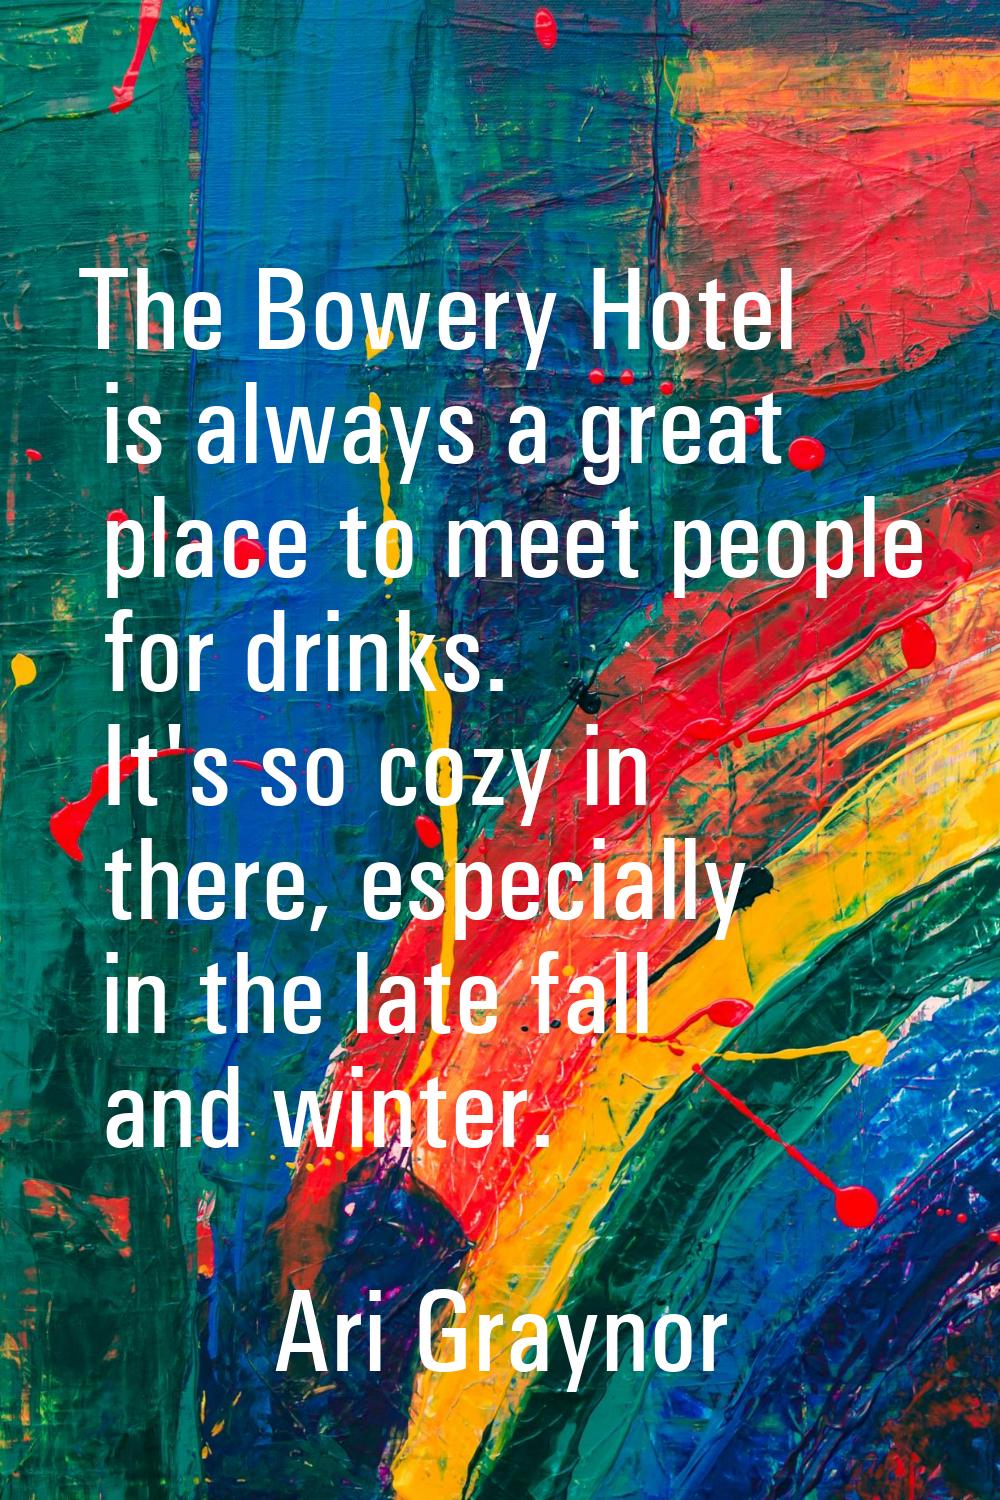 The Bowery Hotel is always a great place to meet people for drinks. It's so cozy in there, especial